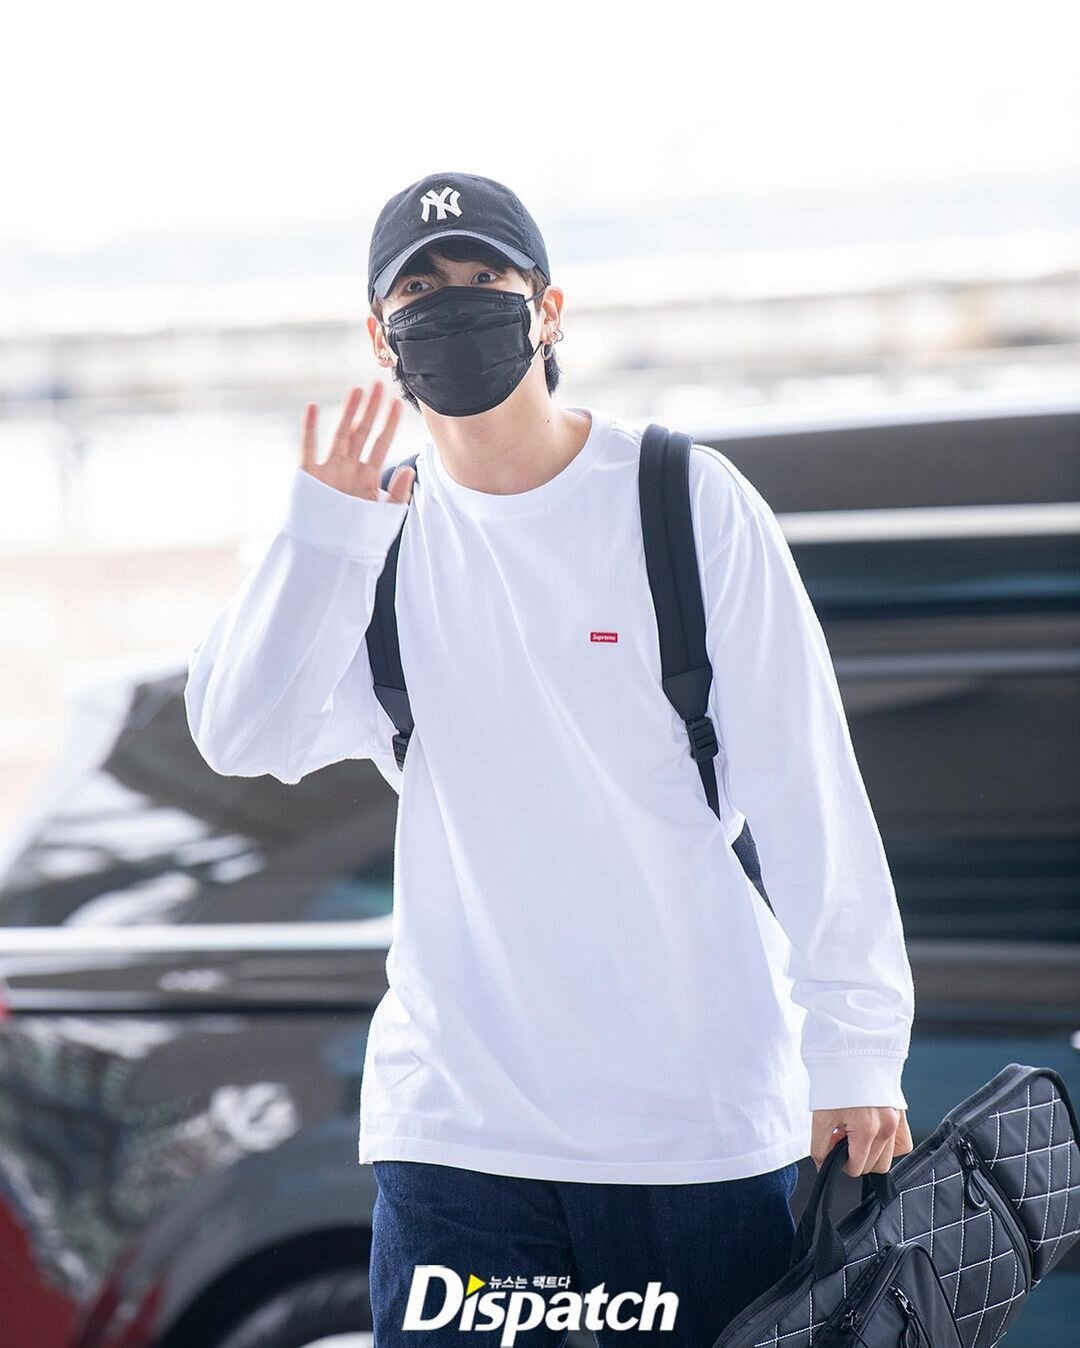 JK DAILYʲᵏ on X: [MEDIA] “BTS Jungkook's Airport Outfit from Louis Vuitton  Gets Sold Out in Different Countries” BTS Jungkook caused his airport look  to be completely sold out on the American